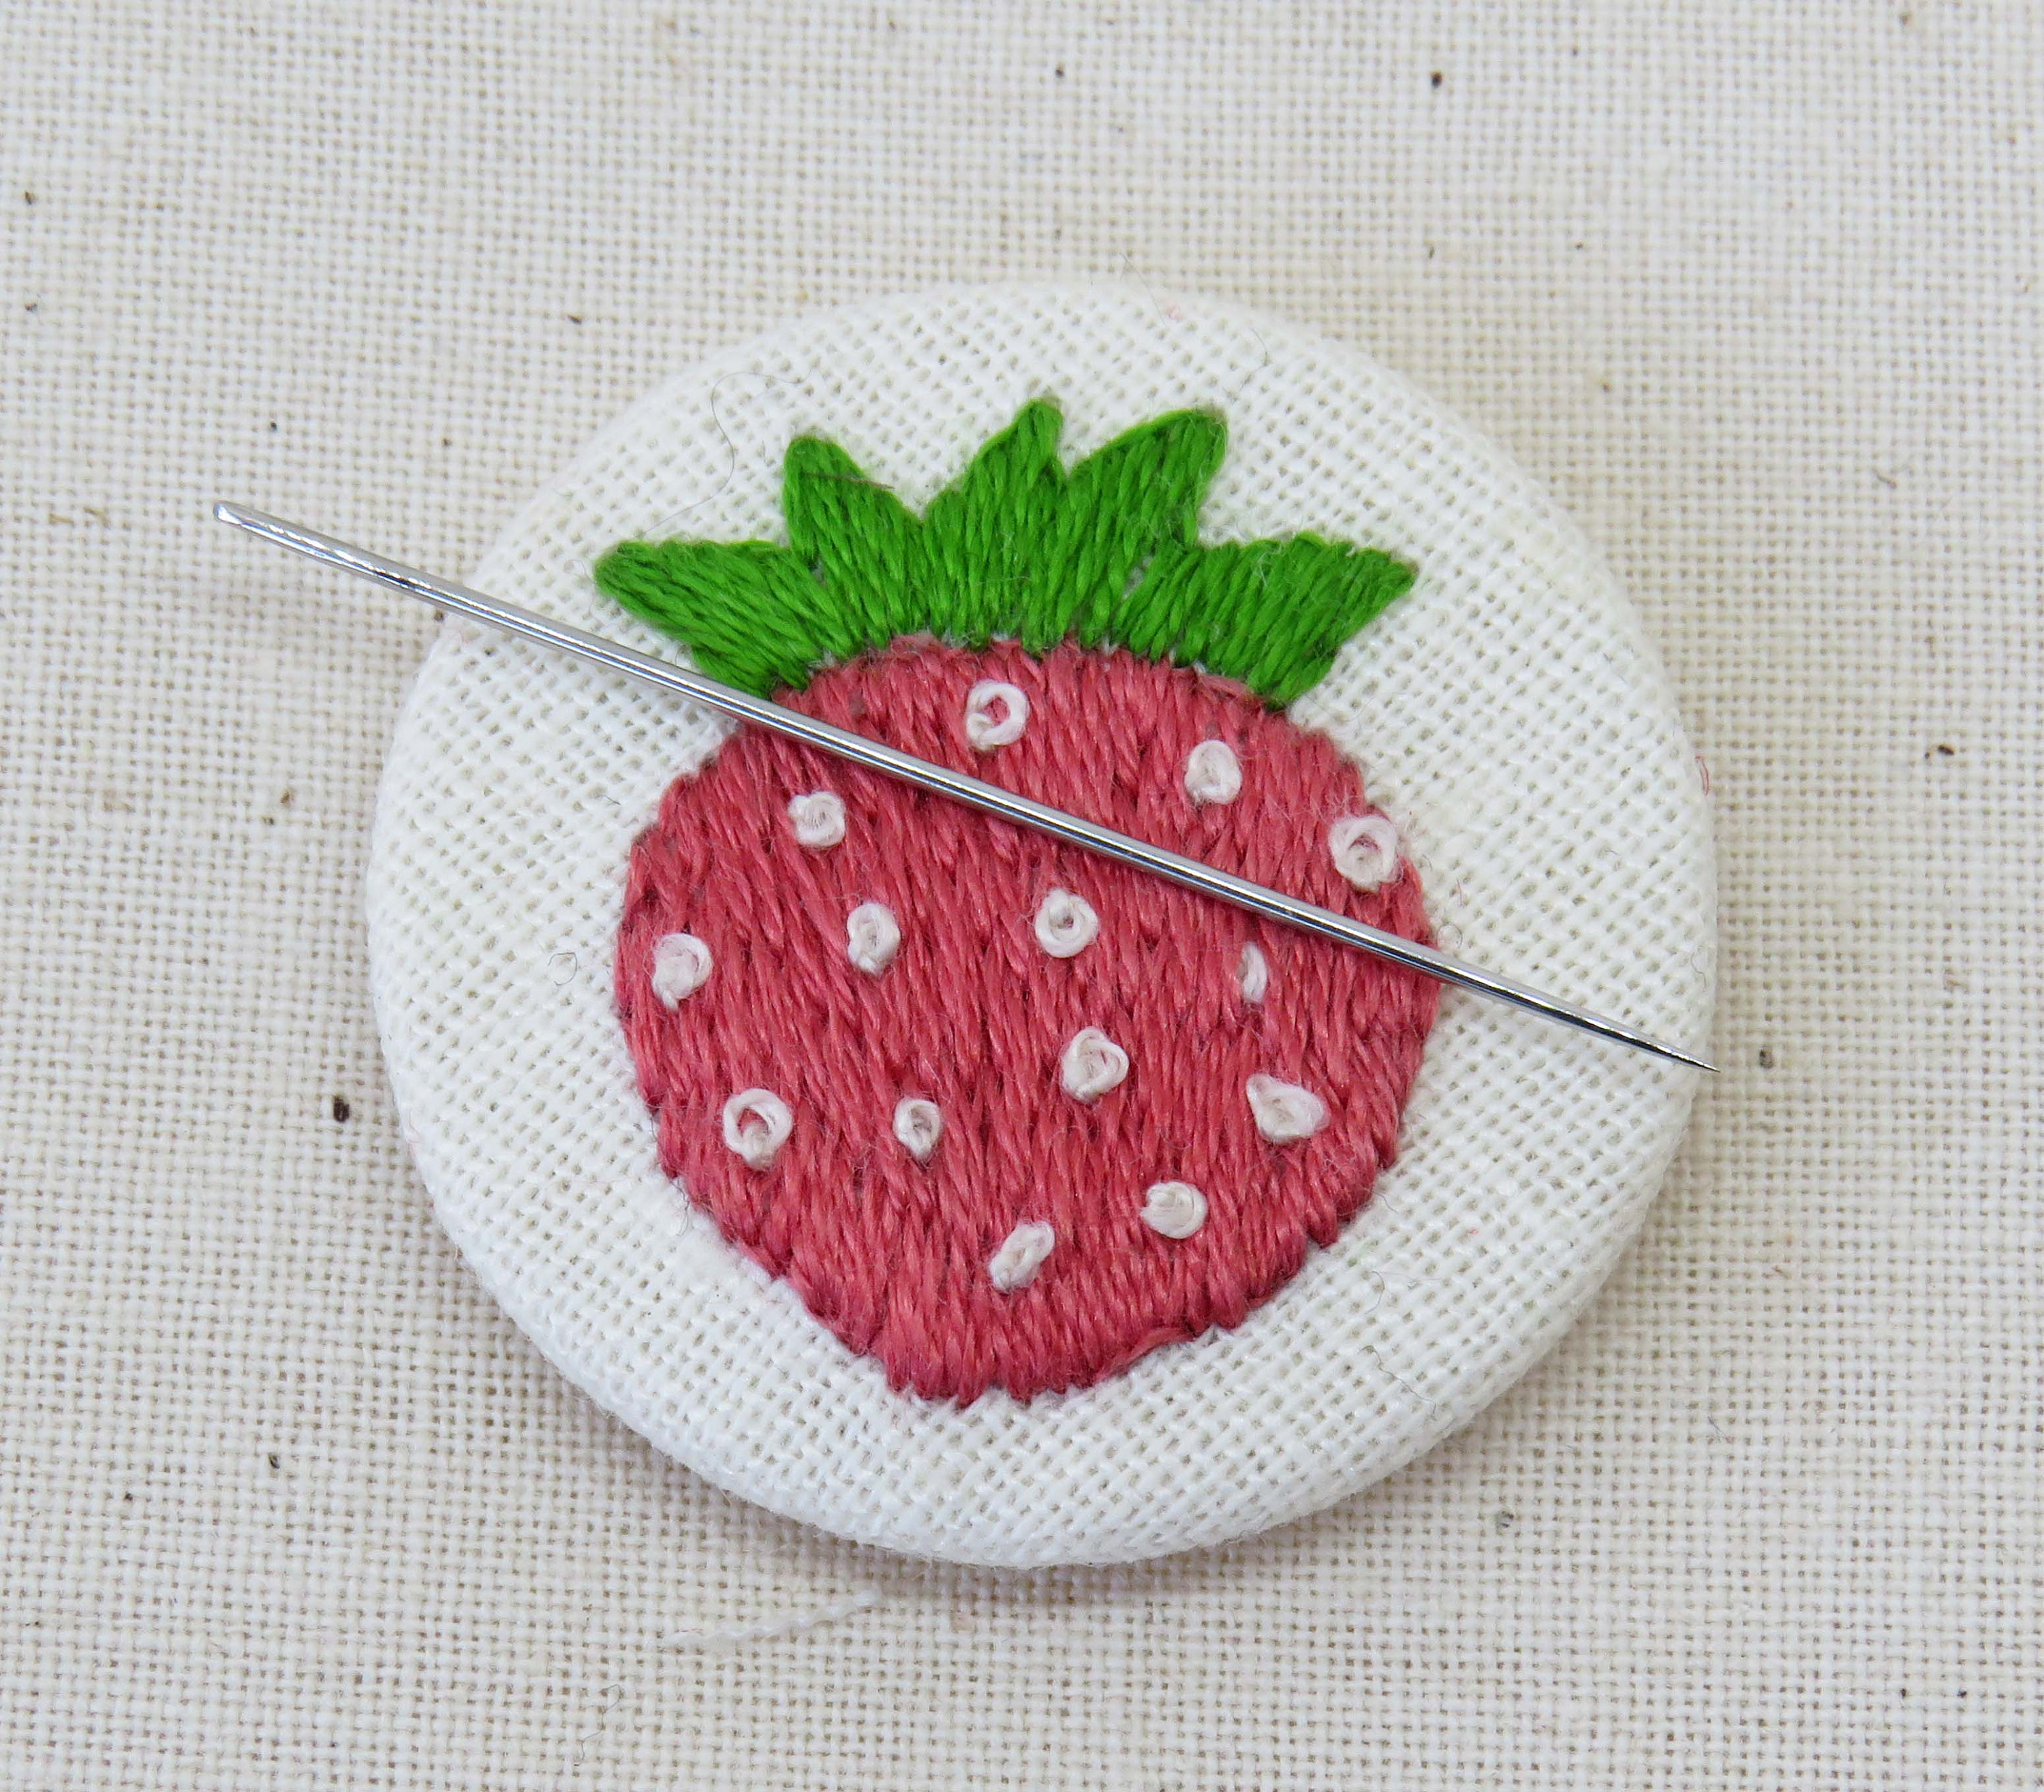 Strawberry Embroidery Pattern Hand Embroidery Kit For Needleminder Strawberry Embroidery Design Embroidery Hoop Art Hand Embroidered Hand Embroidery Pattern